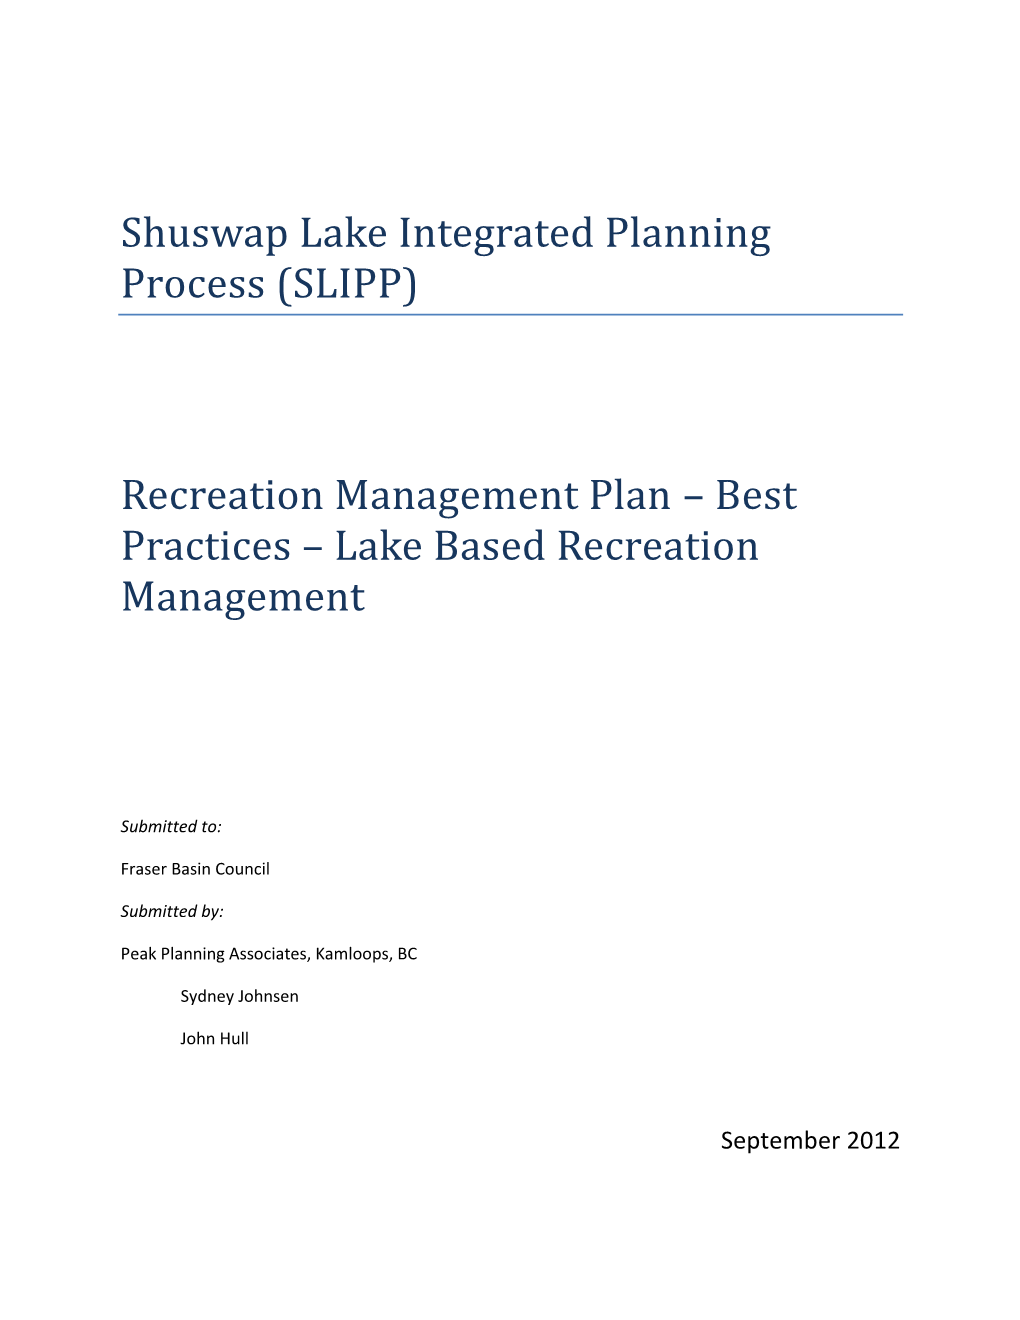 Best Practices – Lake Based Recreation Management